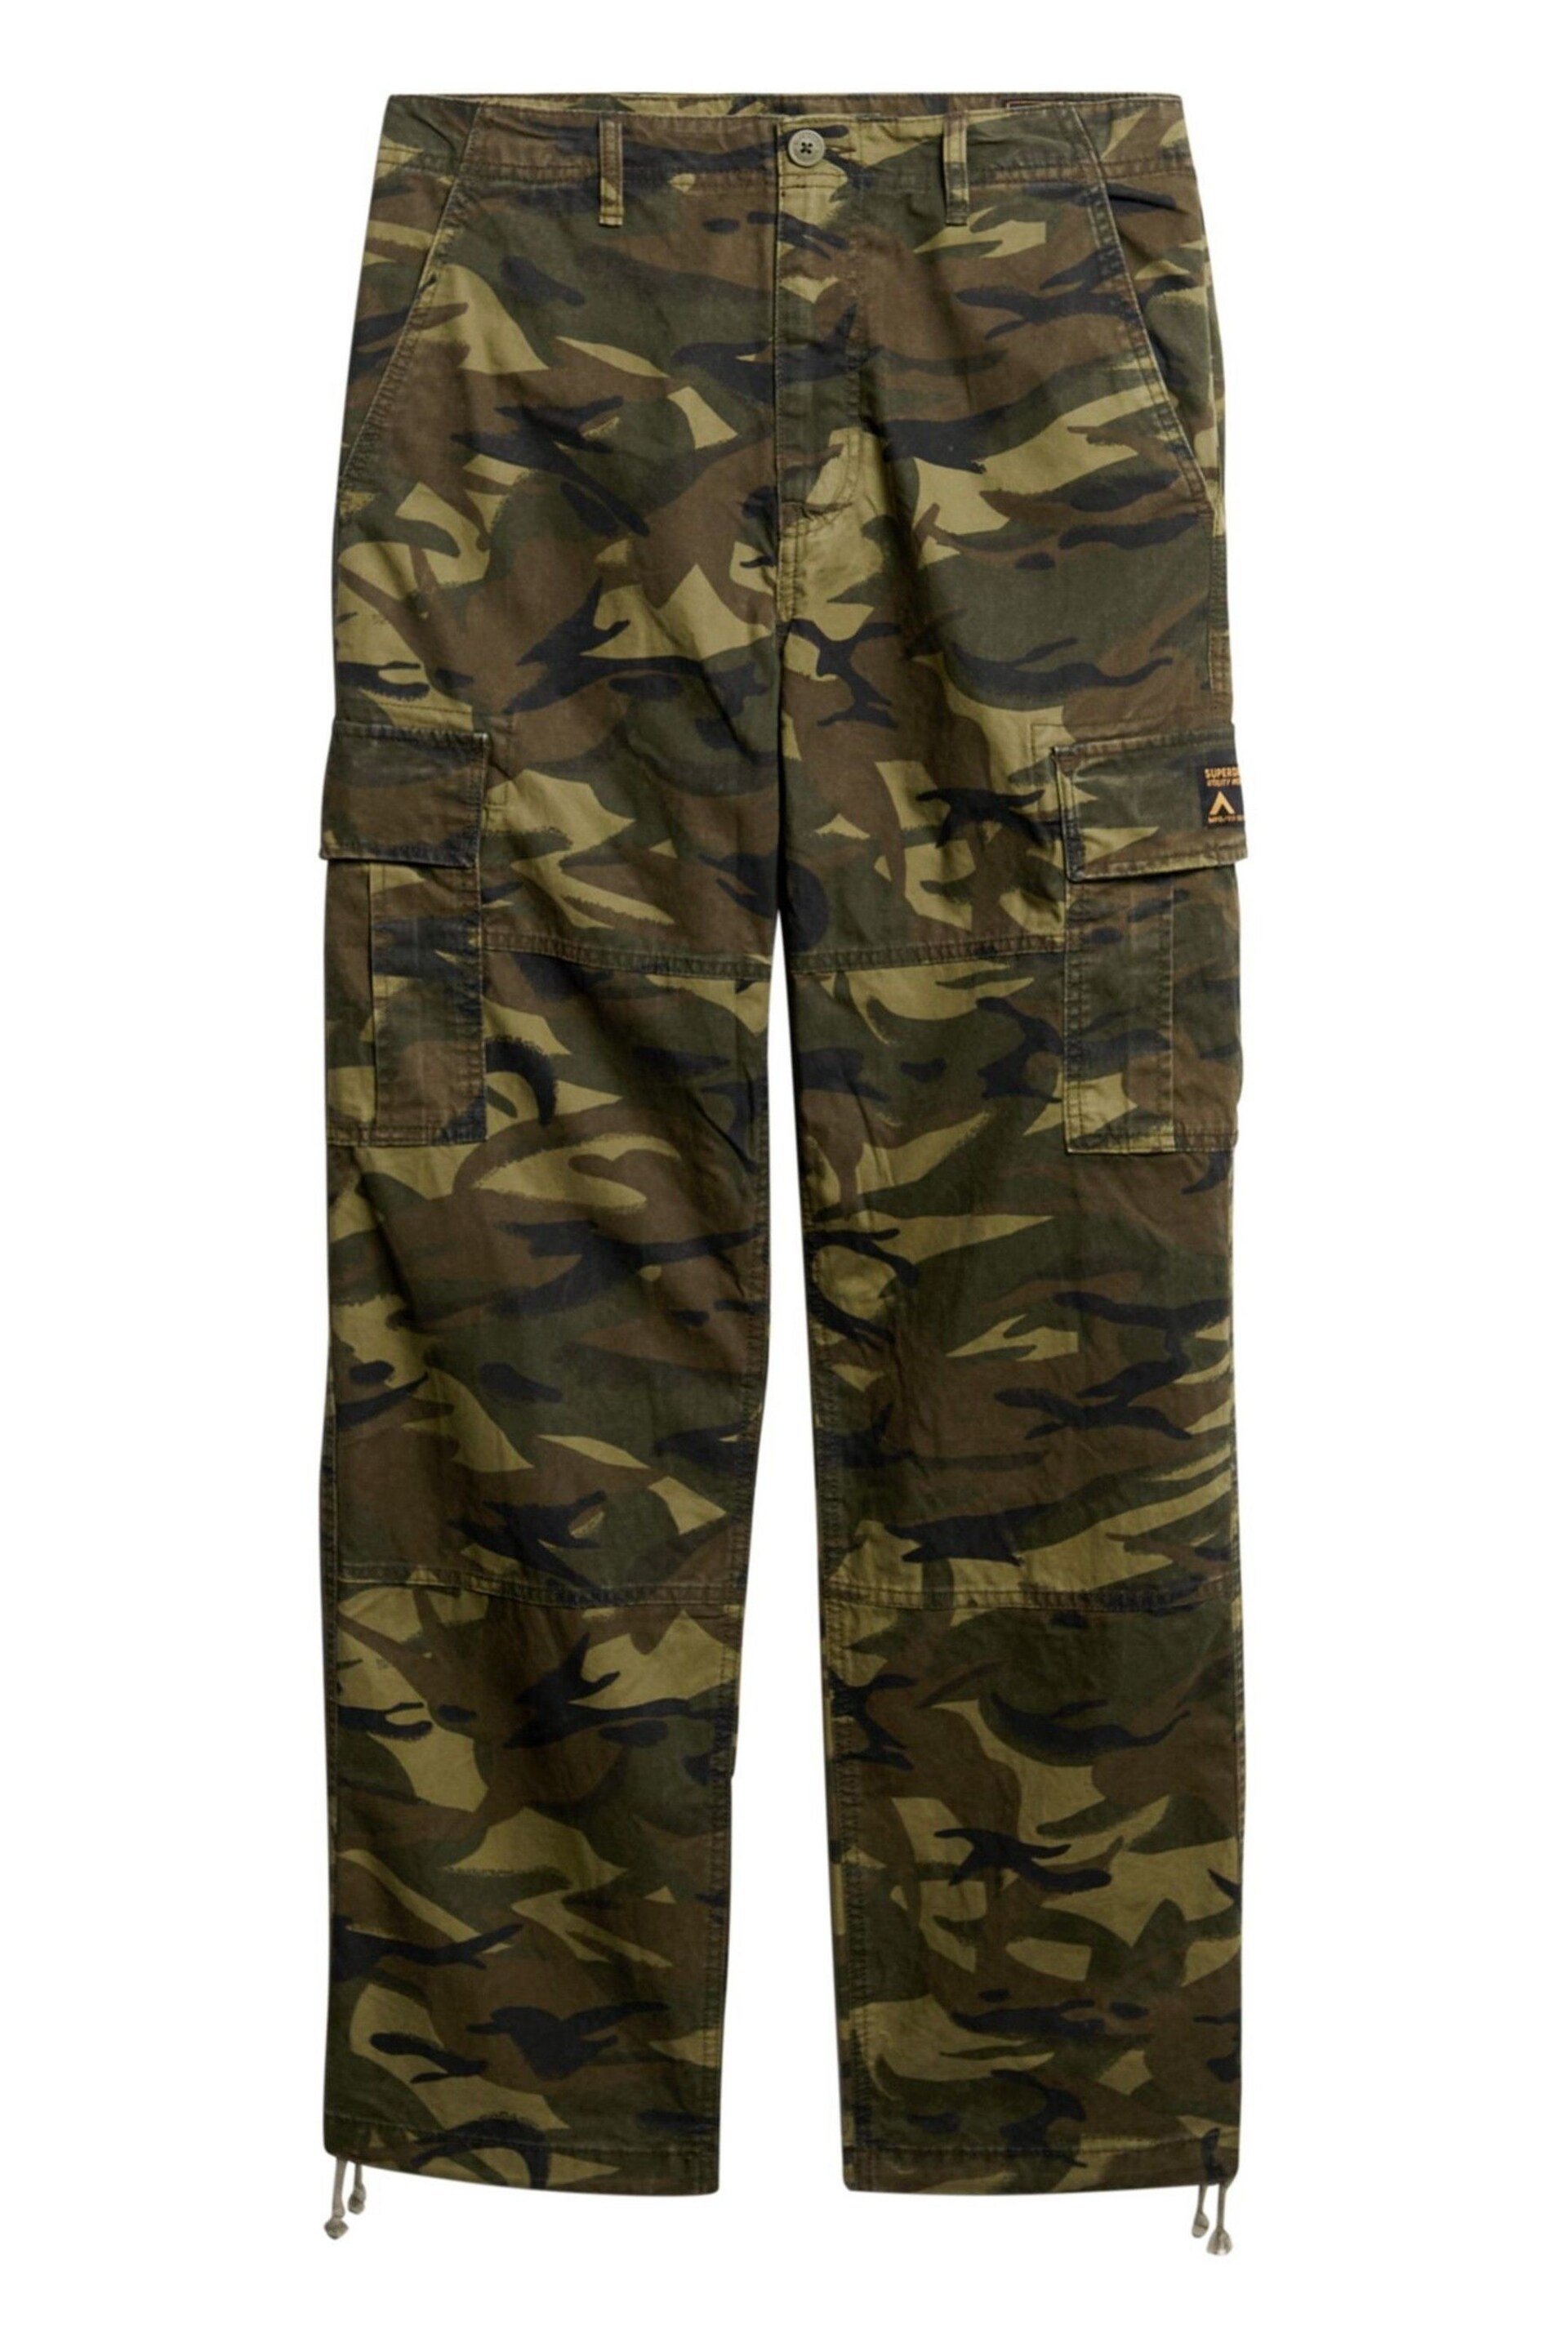 Superdry Green Baggy Cargo Trousers - Image 5 of 5